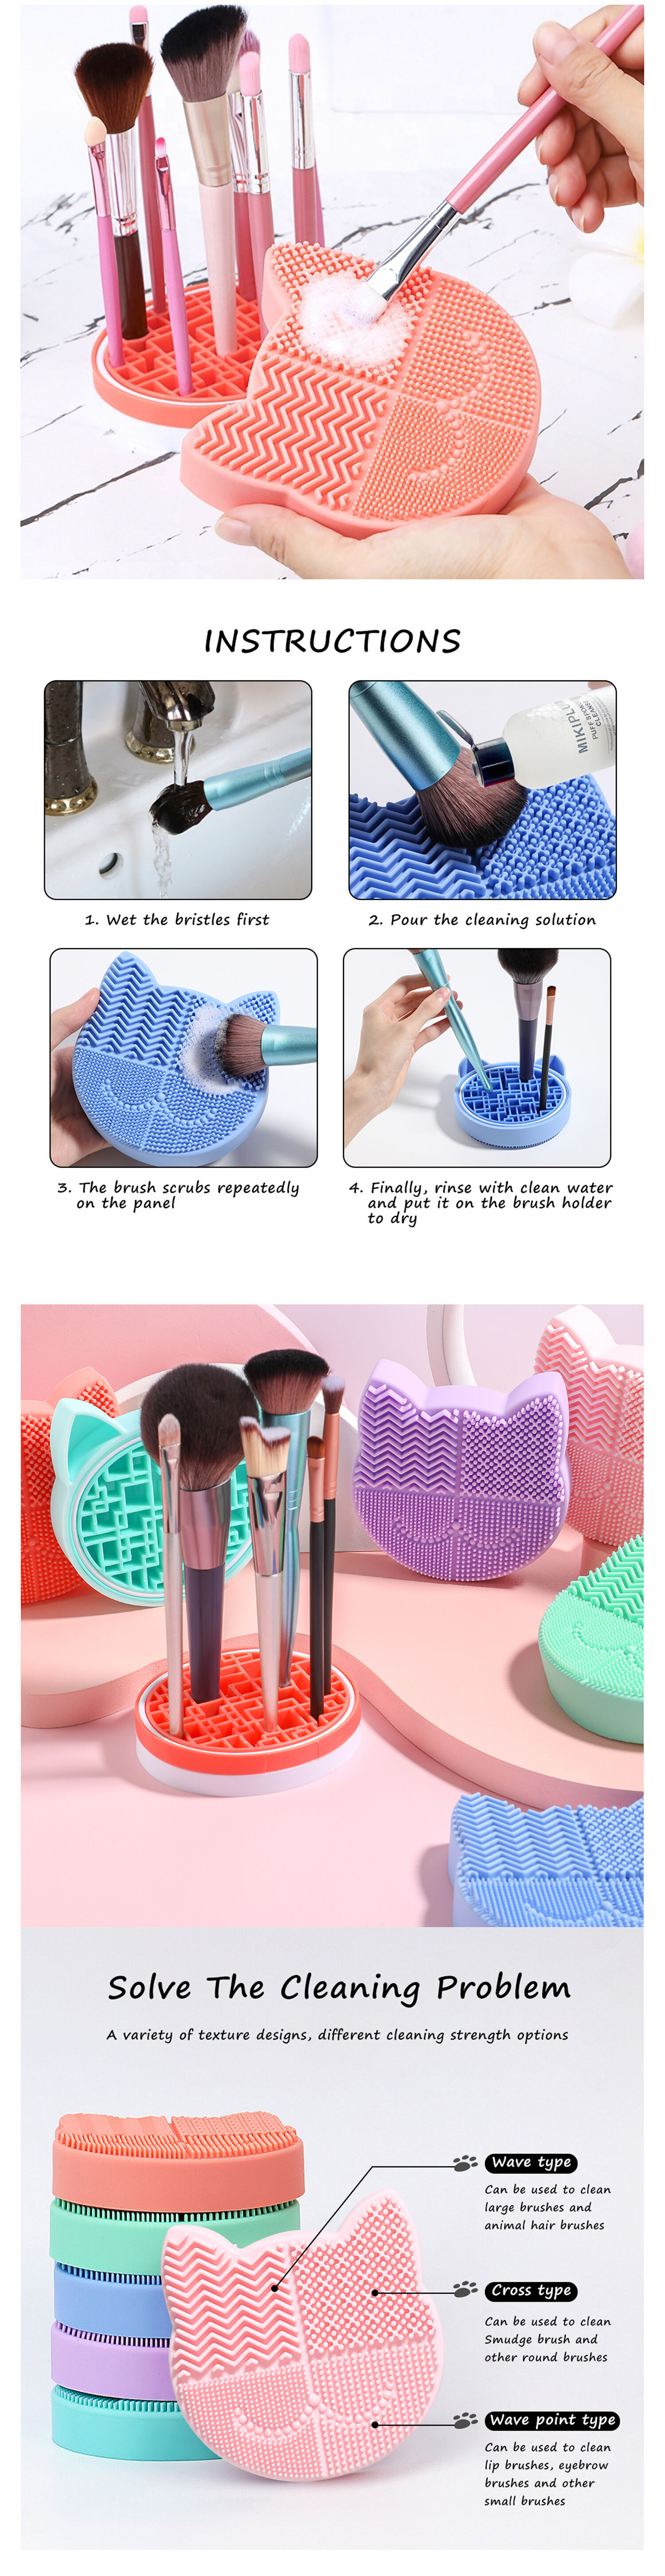 3 In 1 Silicone Makeup Brush Cleaning Pad, Makeup Brush Drying